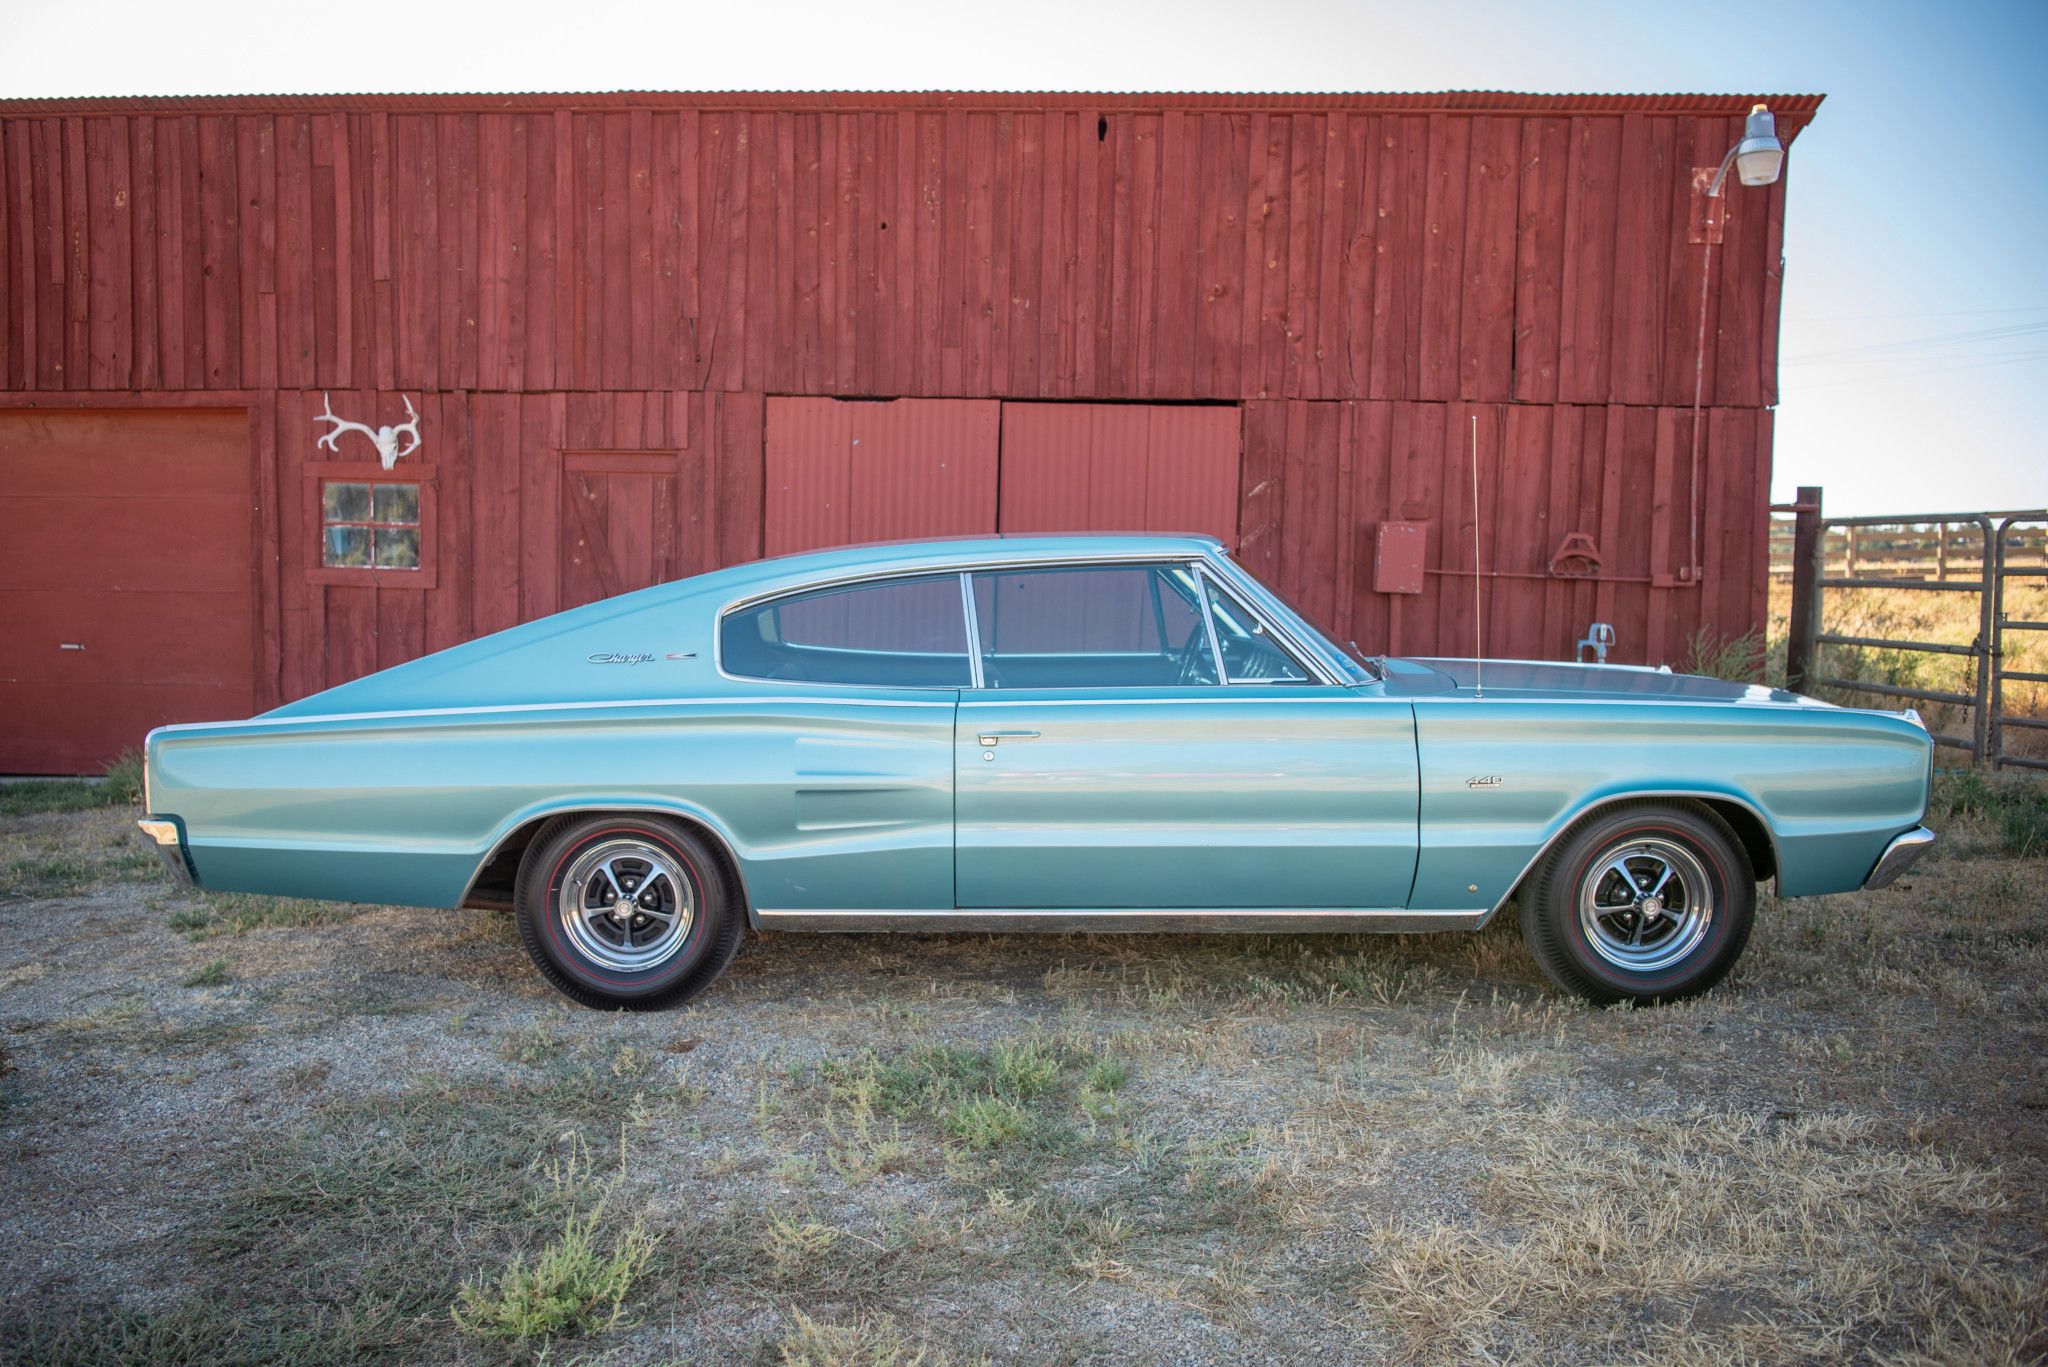 Here's how much this 1967 Dodge Charger is worth, 426 R/T 440 Magnum 1966